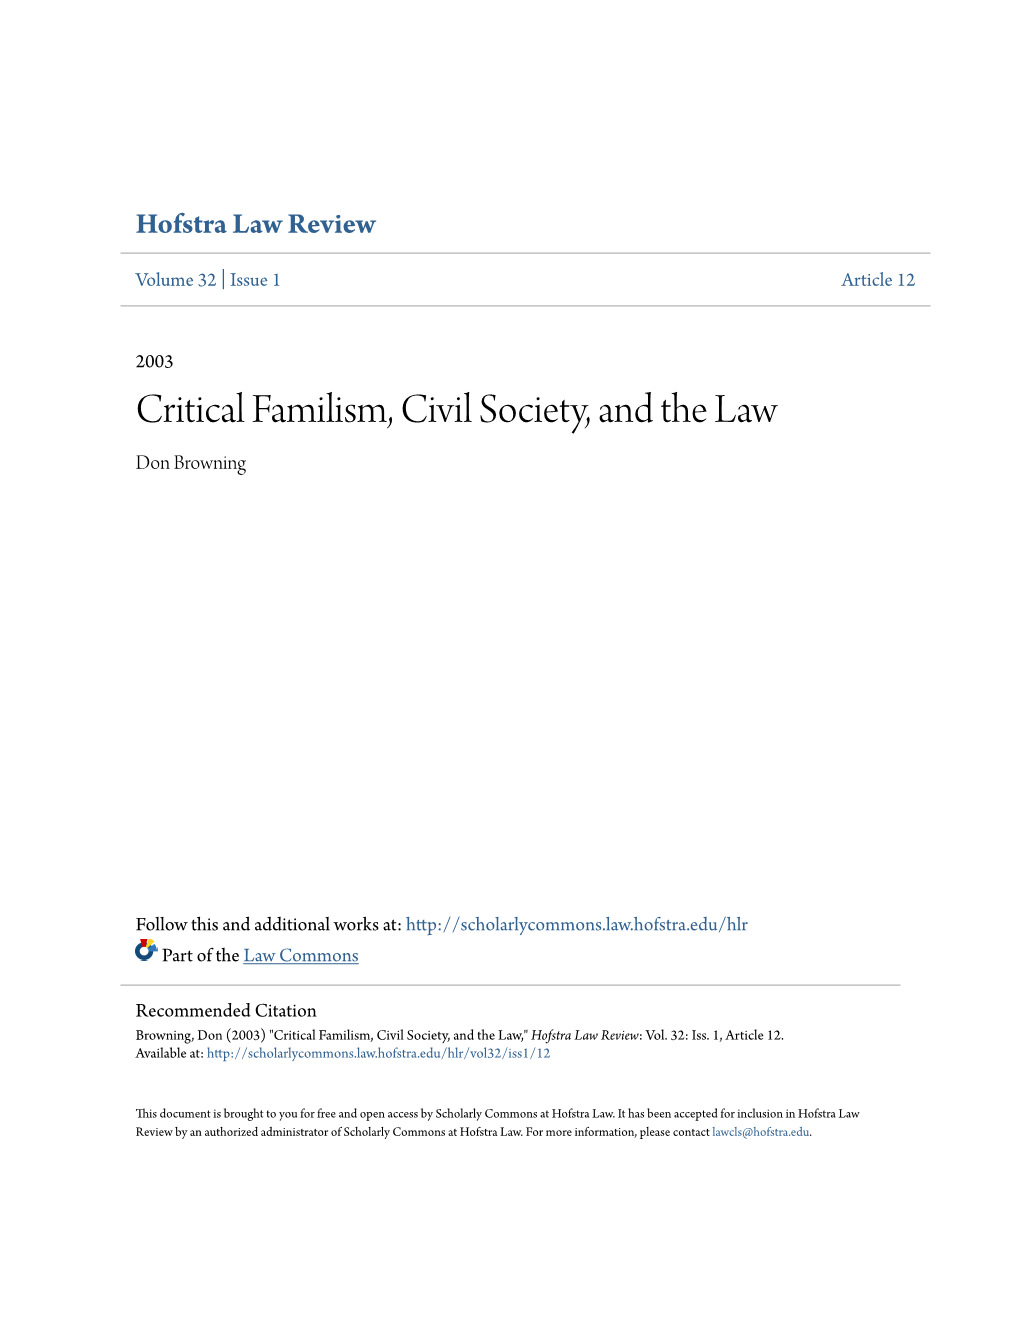 Critical Familism, Civil Society, and the Law Don Browning